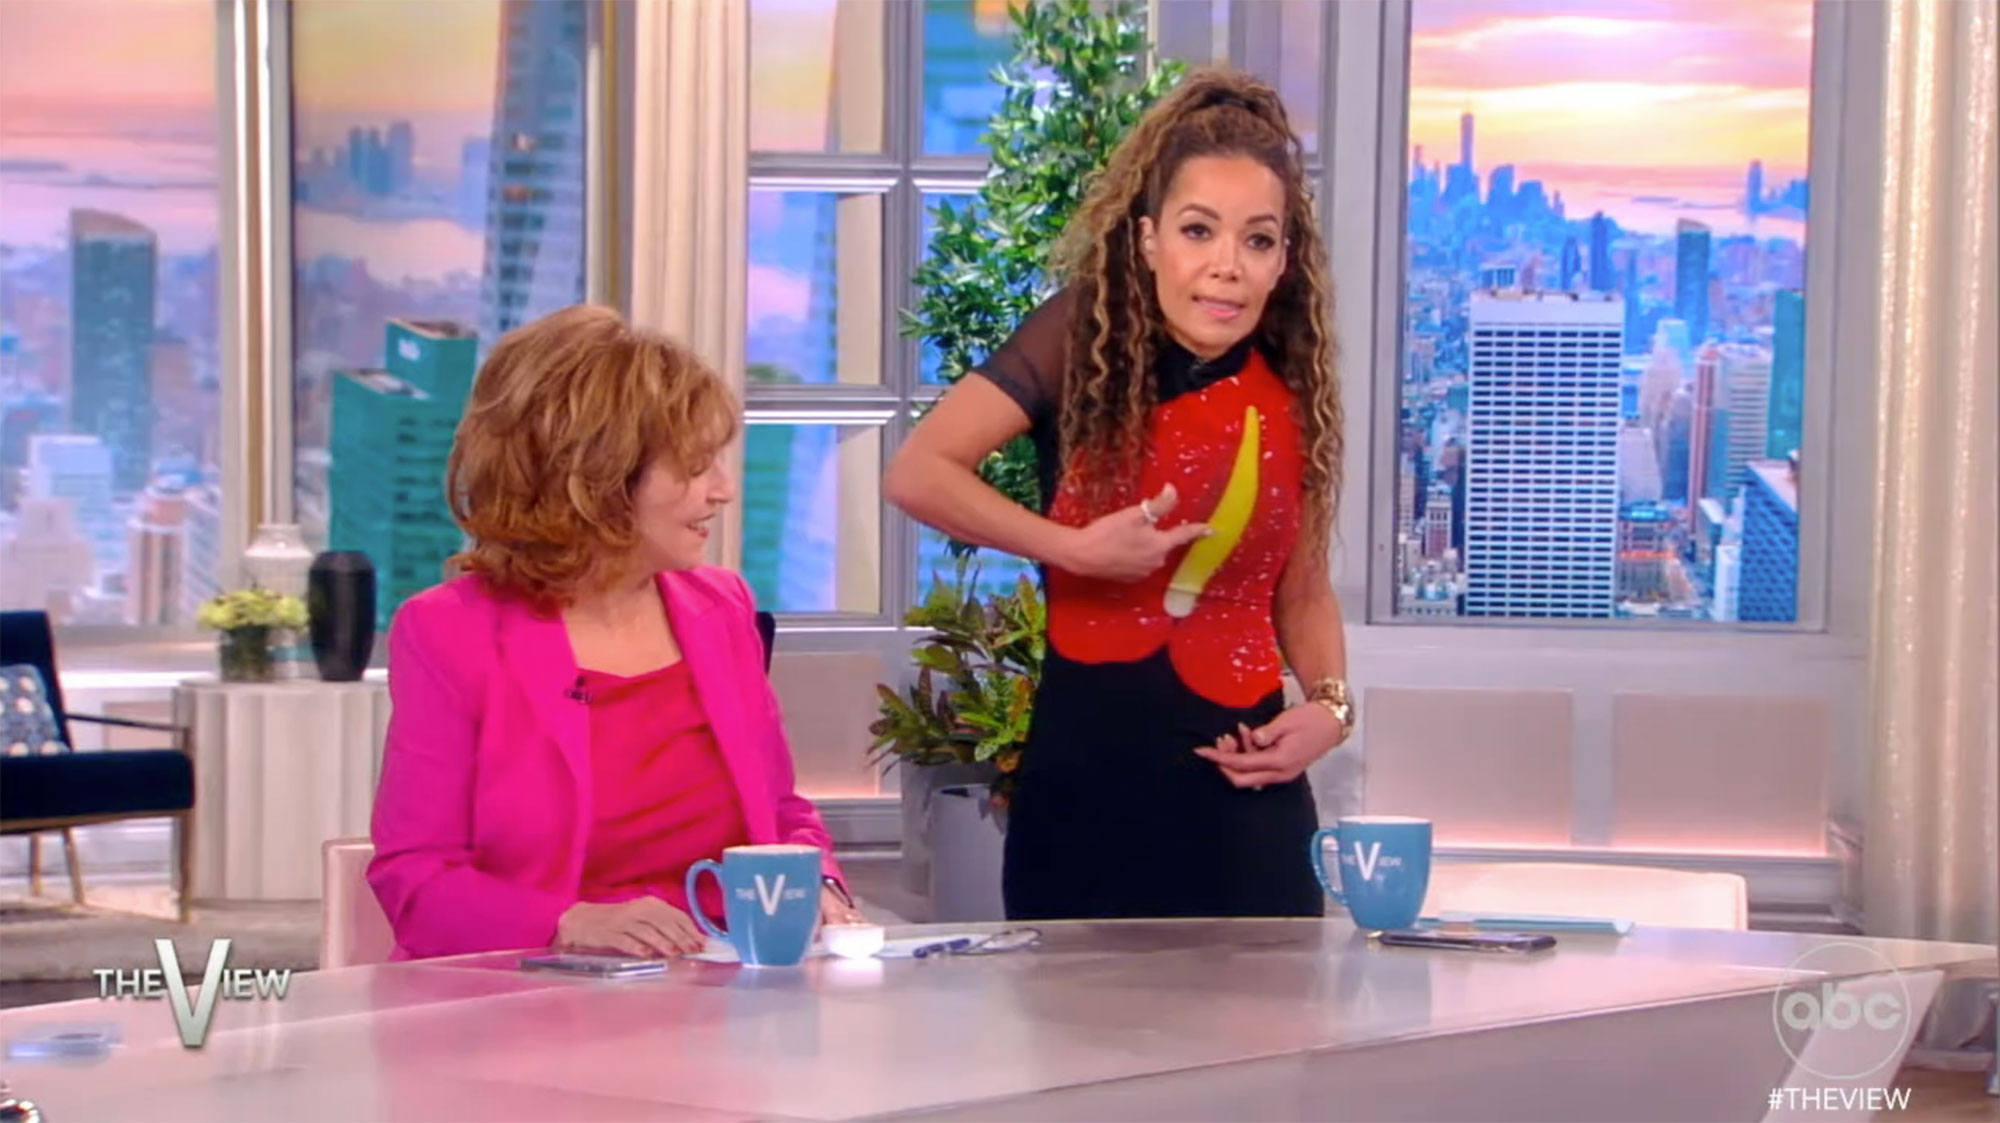 Debate erupts on The View over alleged 'phallus' on Sunny Hostin's dress: 'It is a flower'